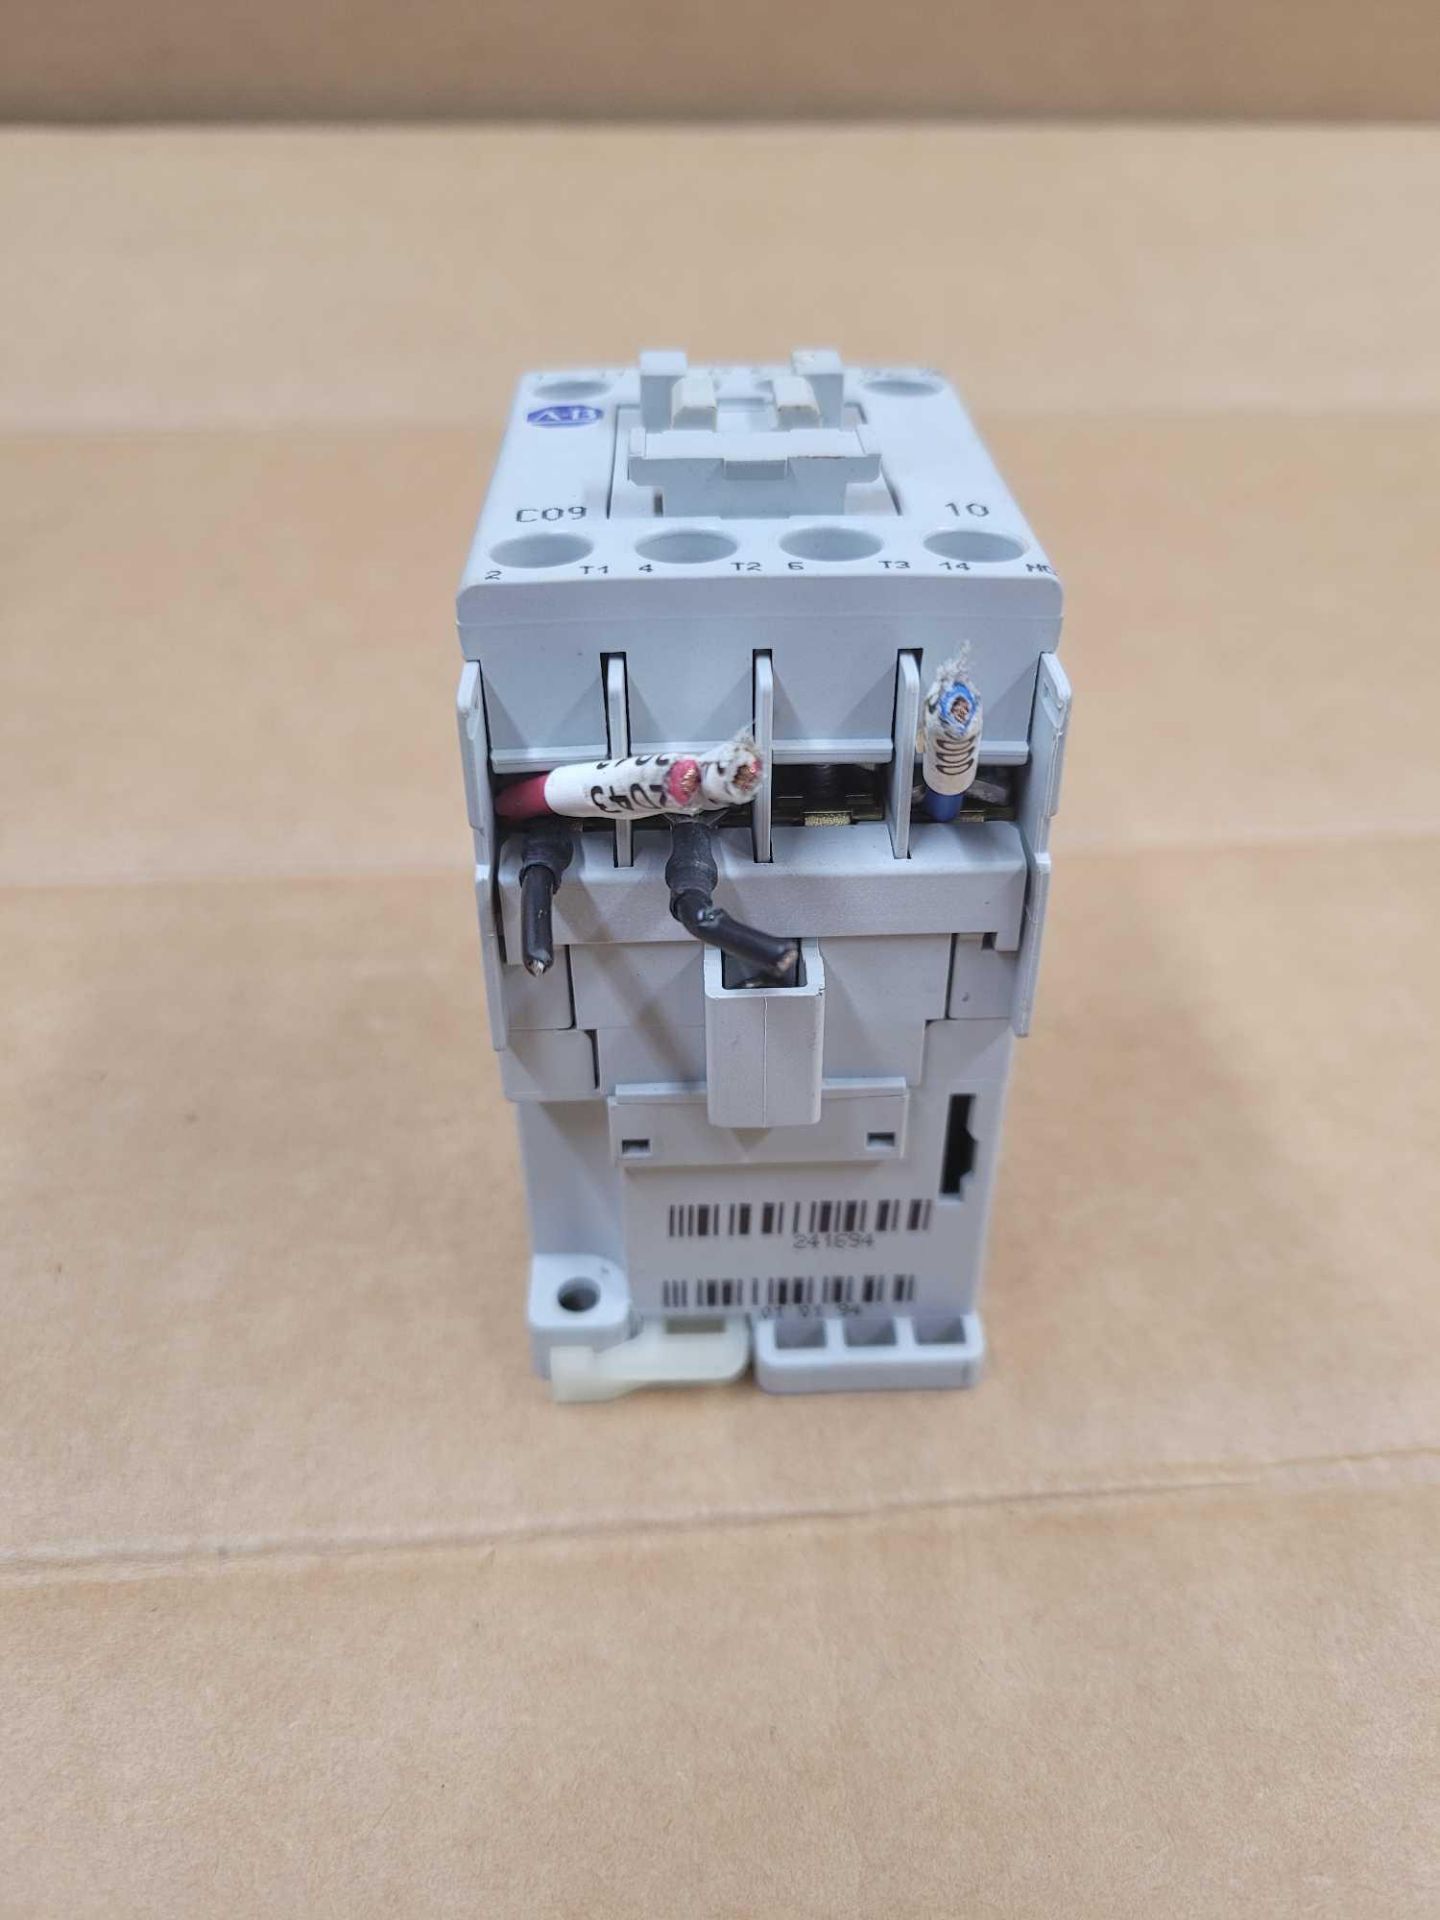 LOT OF 5 ALLEN BRADLEY 100-C09E*10 / Series A Contactor  /  Lot Weight: 4.4 lbs - Image 5 of 9